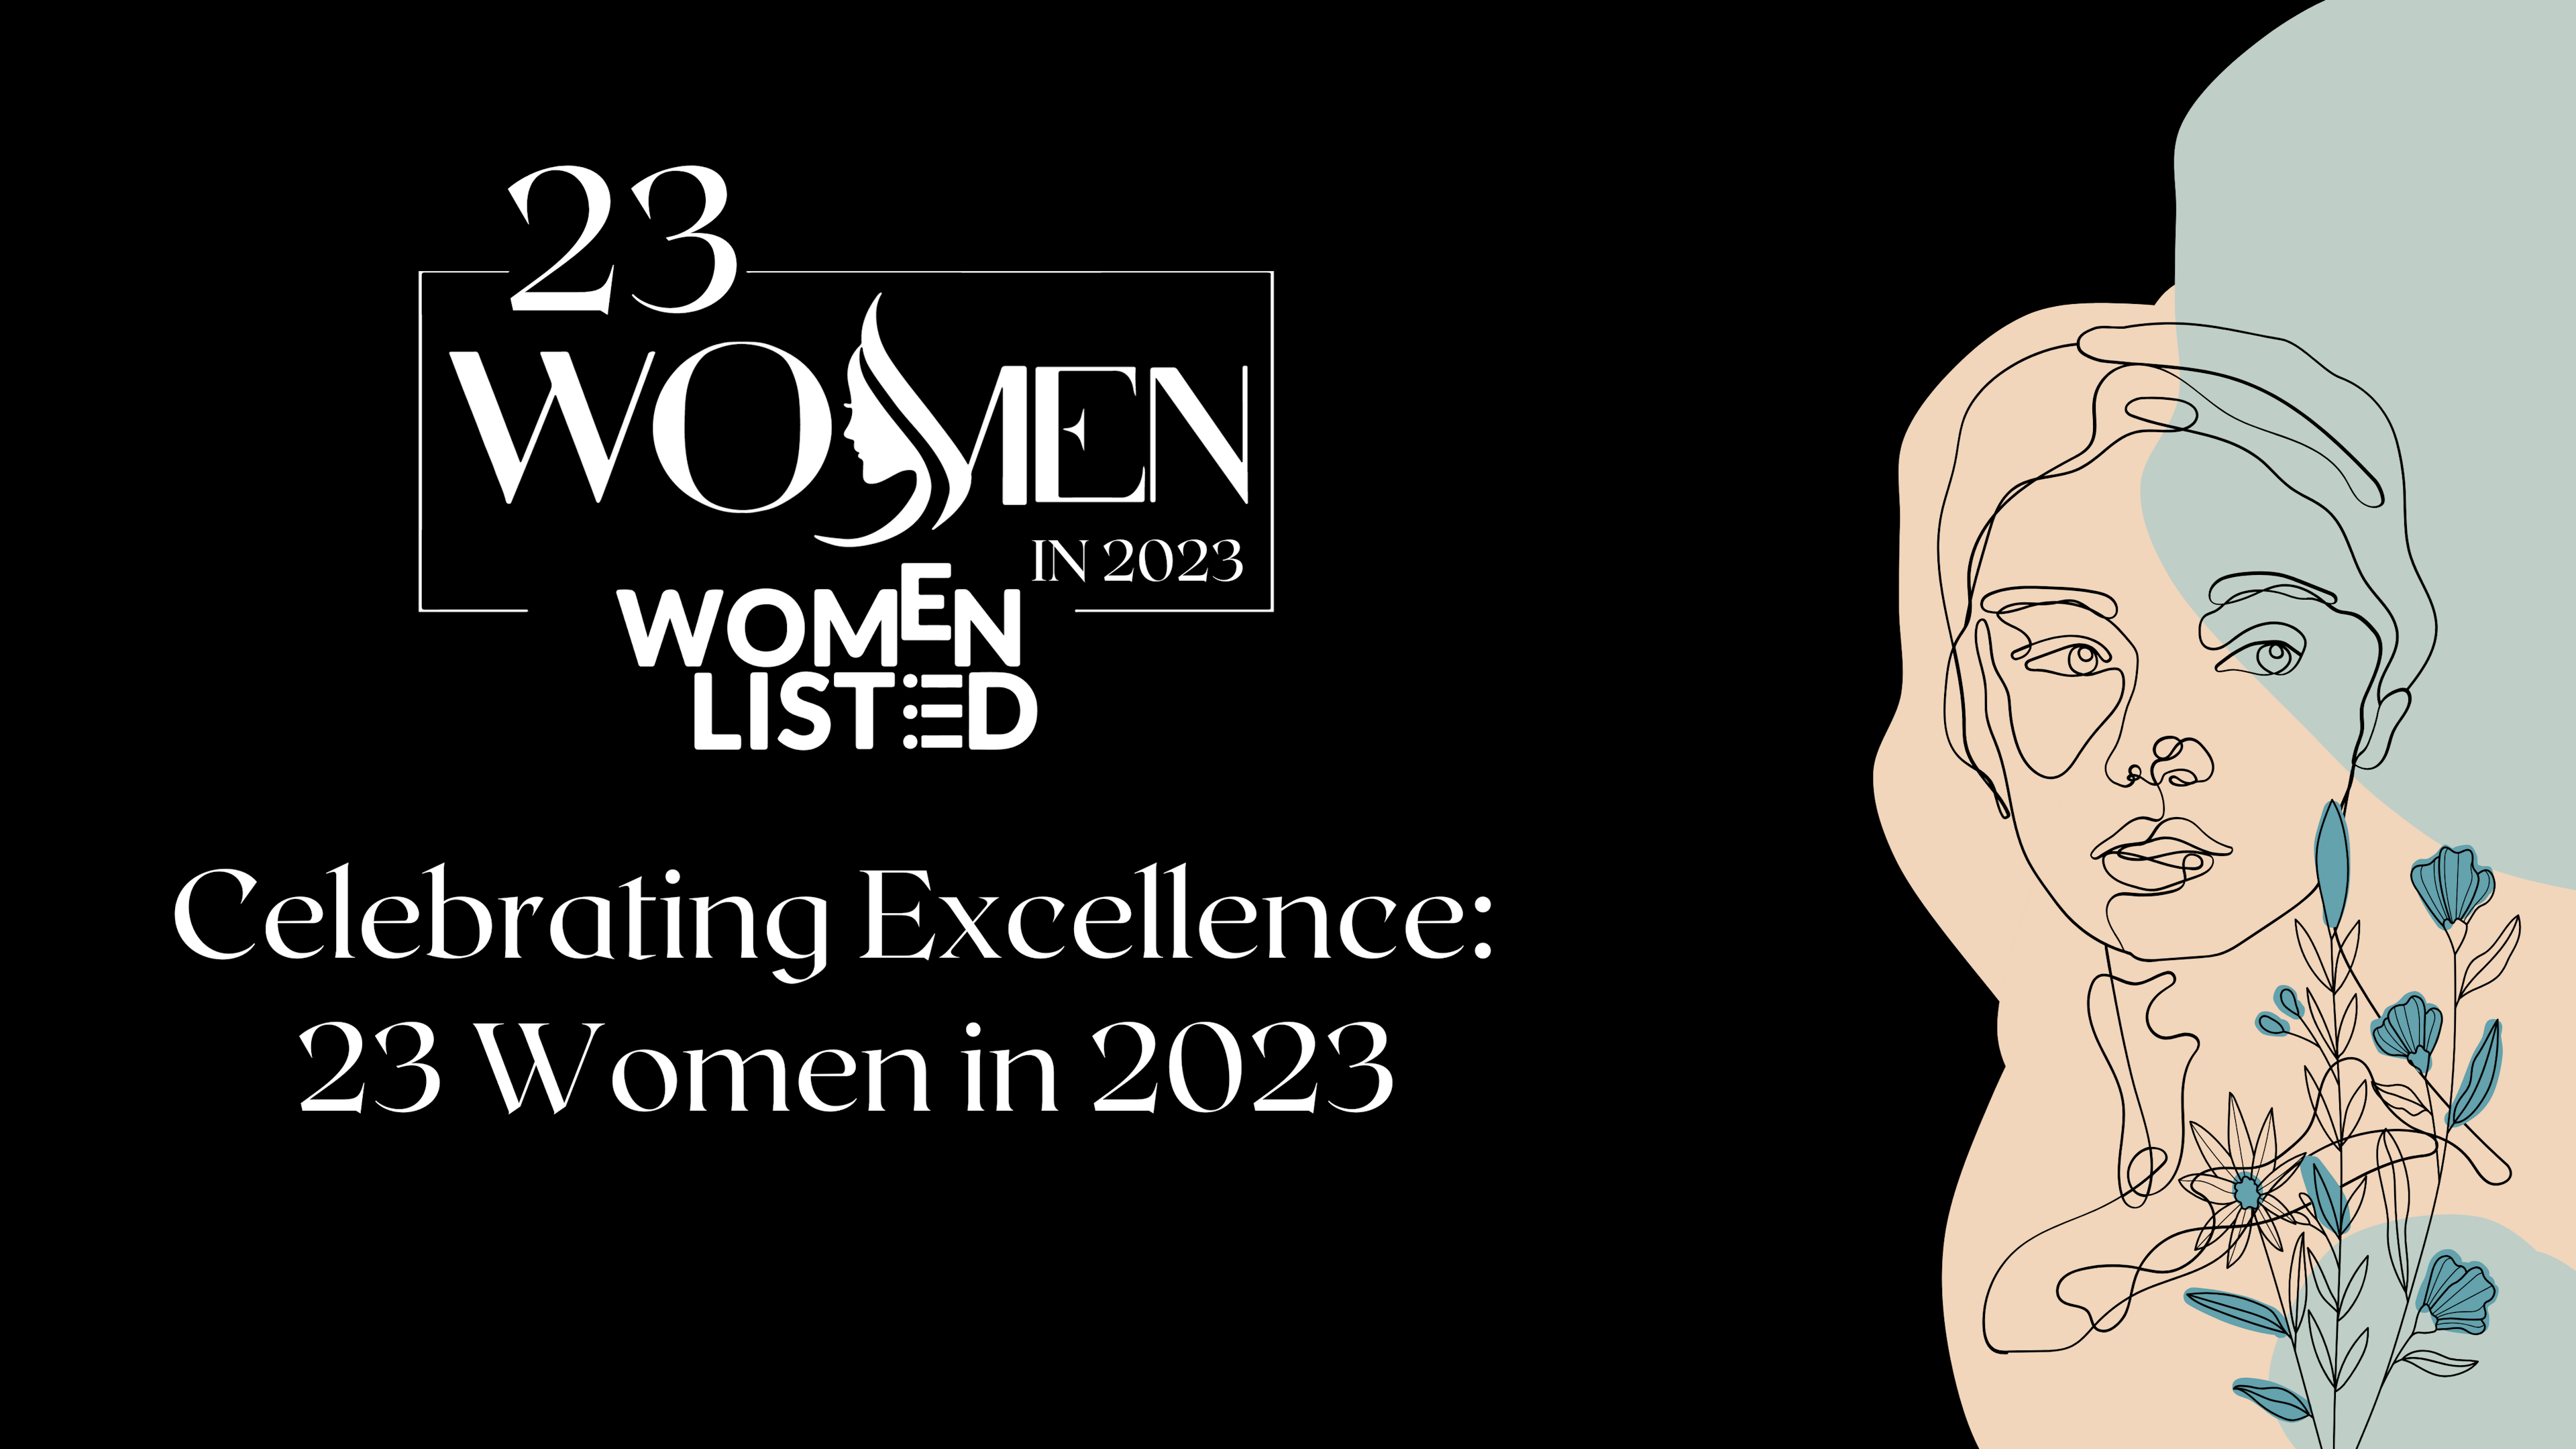 Celebrating Excellence: Empowering Women 23 Women in 2023